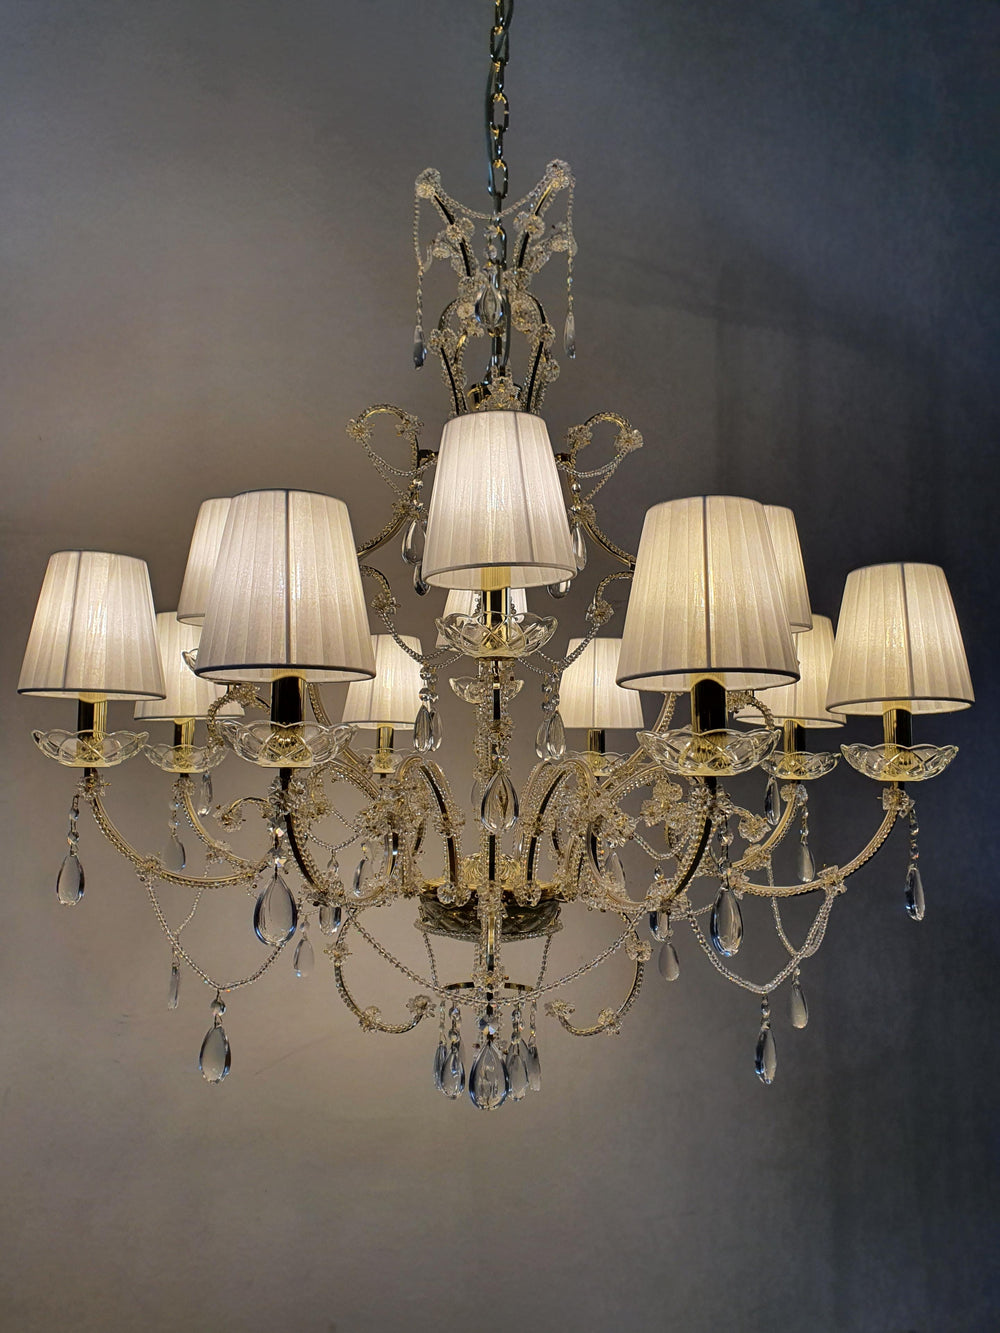 Classic chandelier in Light Brass and Crystal